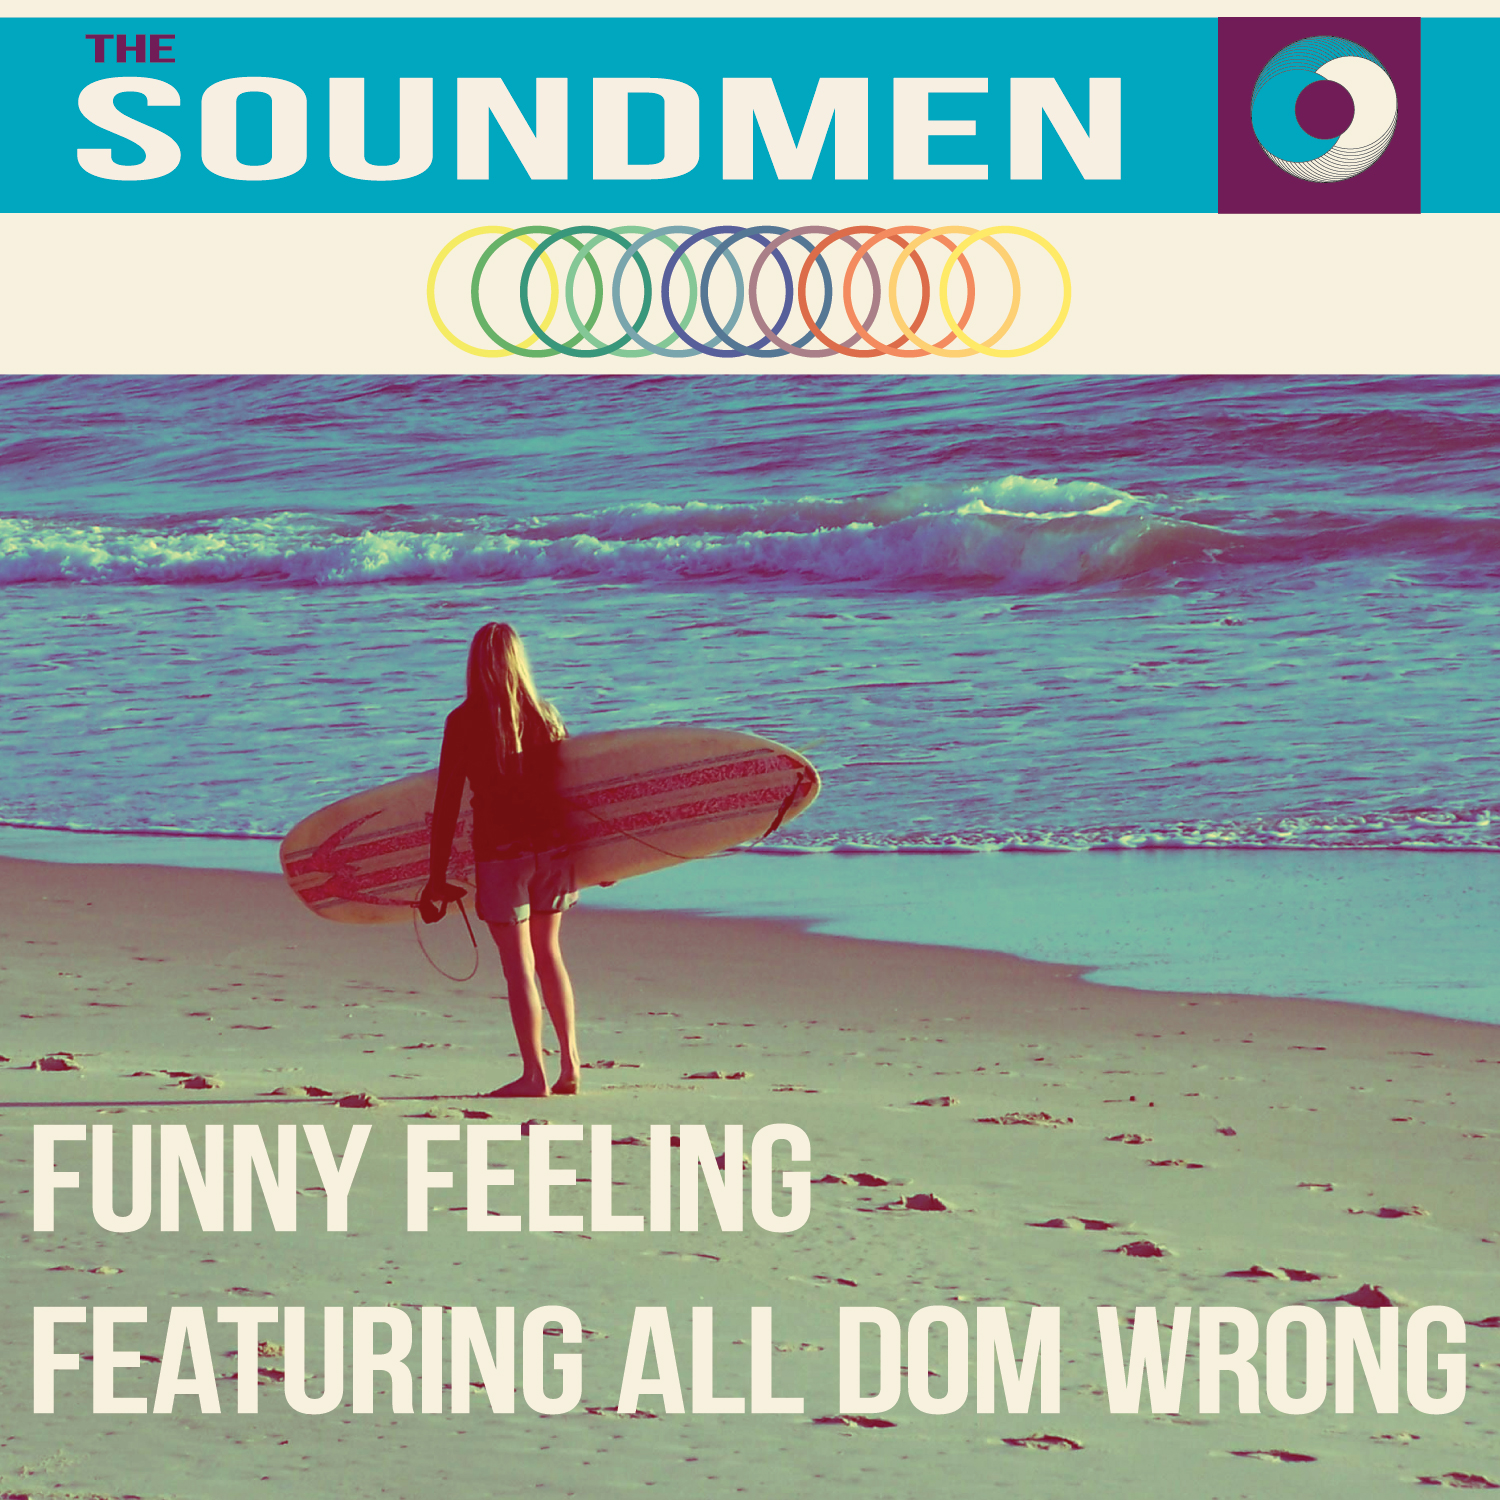 WATCH: The Soundmen (Featuring All Dom Wrong) – “Funny Feeling” Music Video Premiere! PLUS full EP Stream!